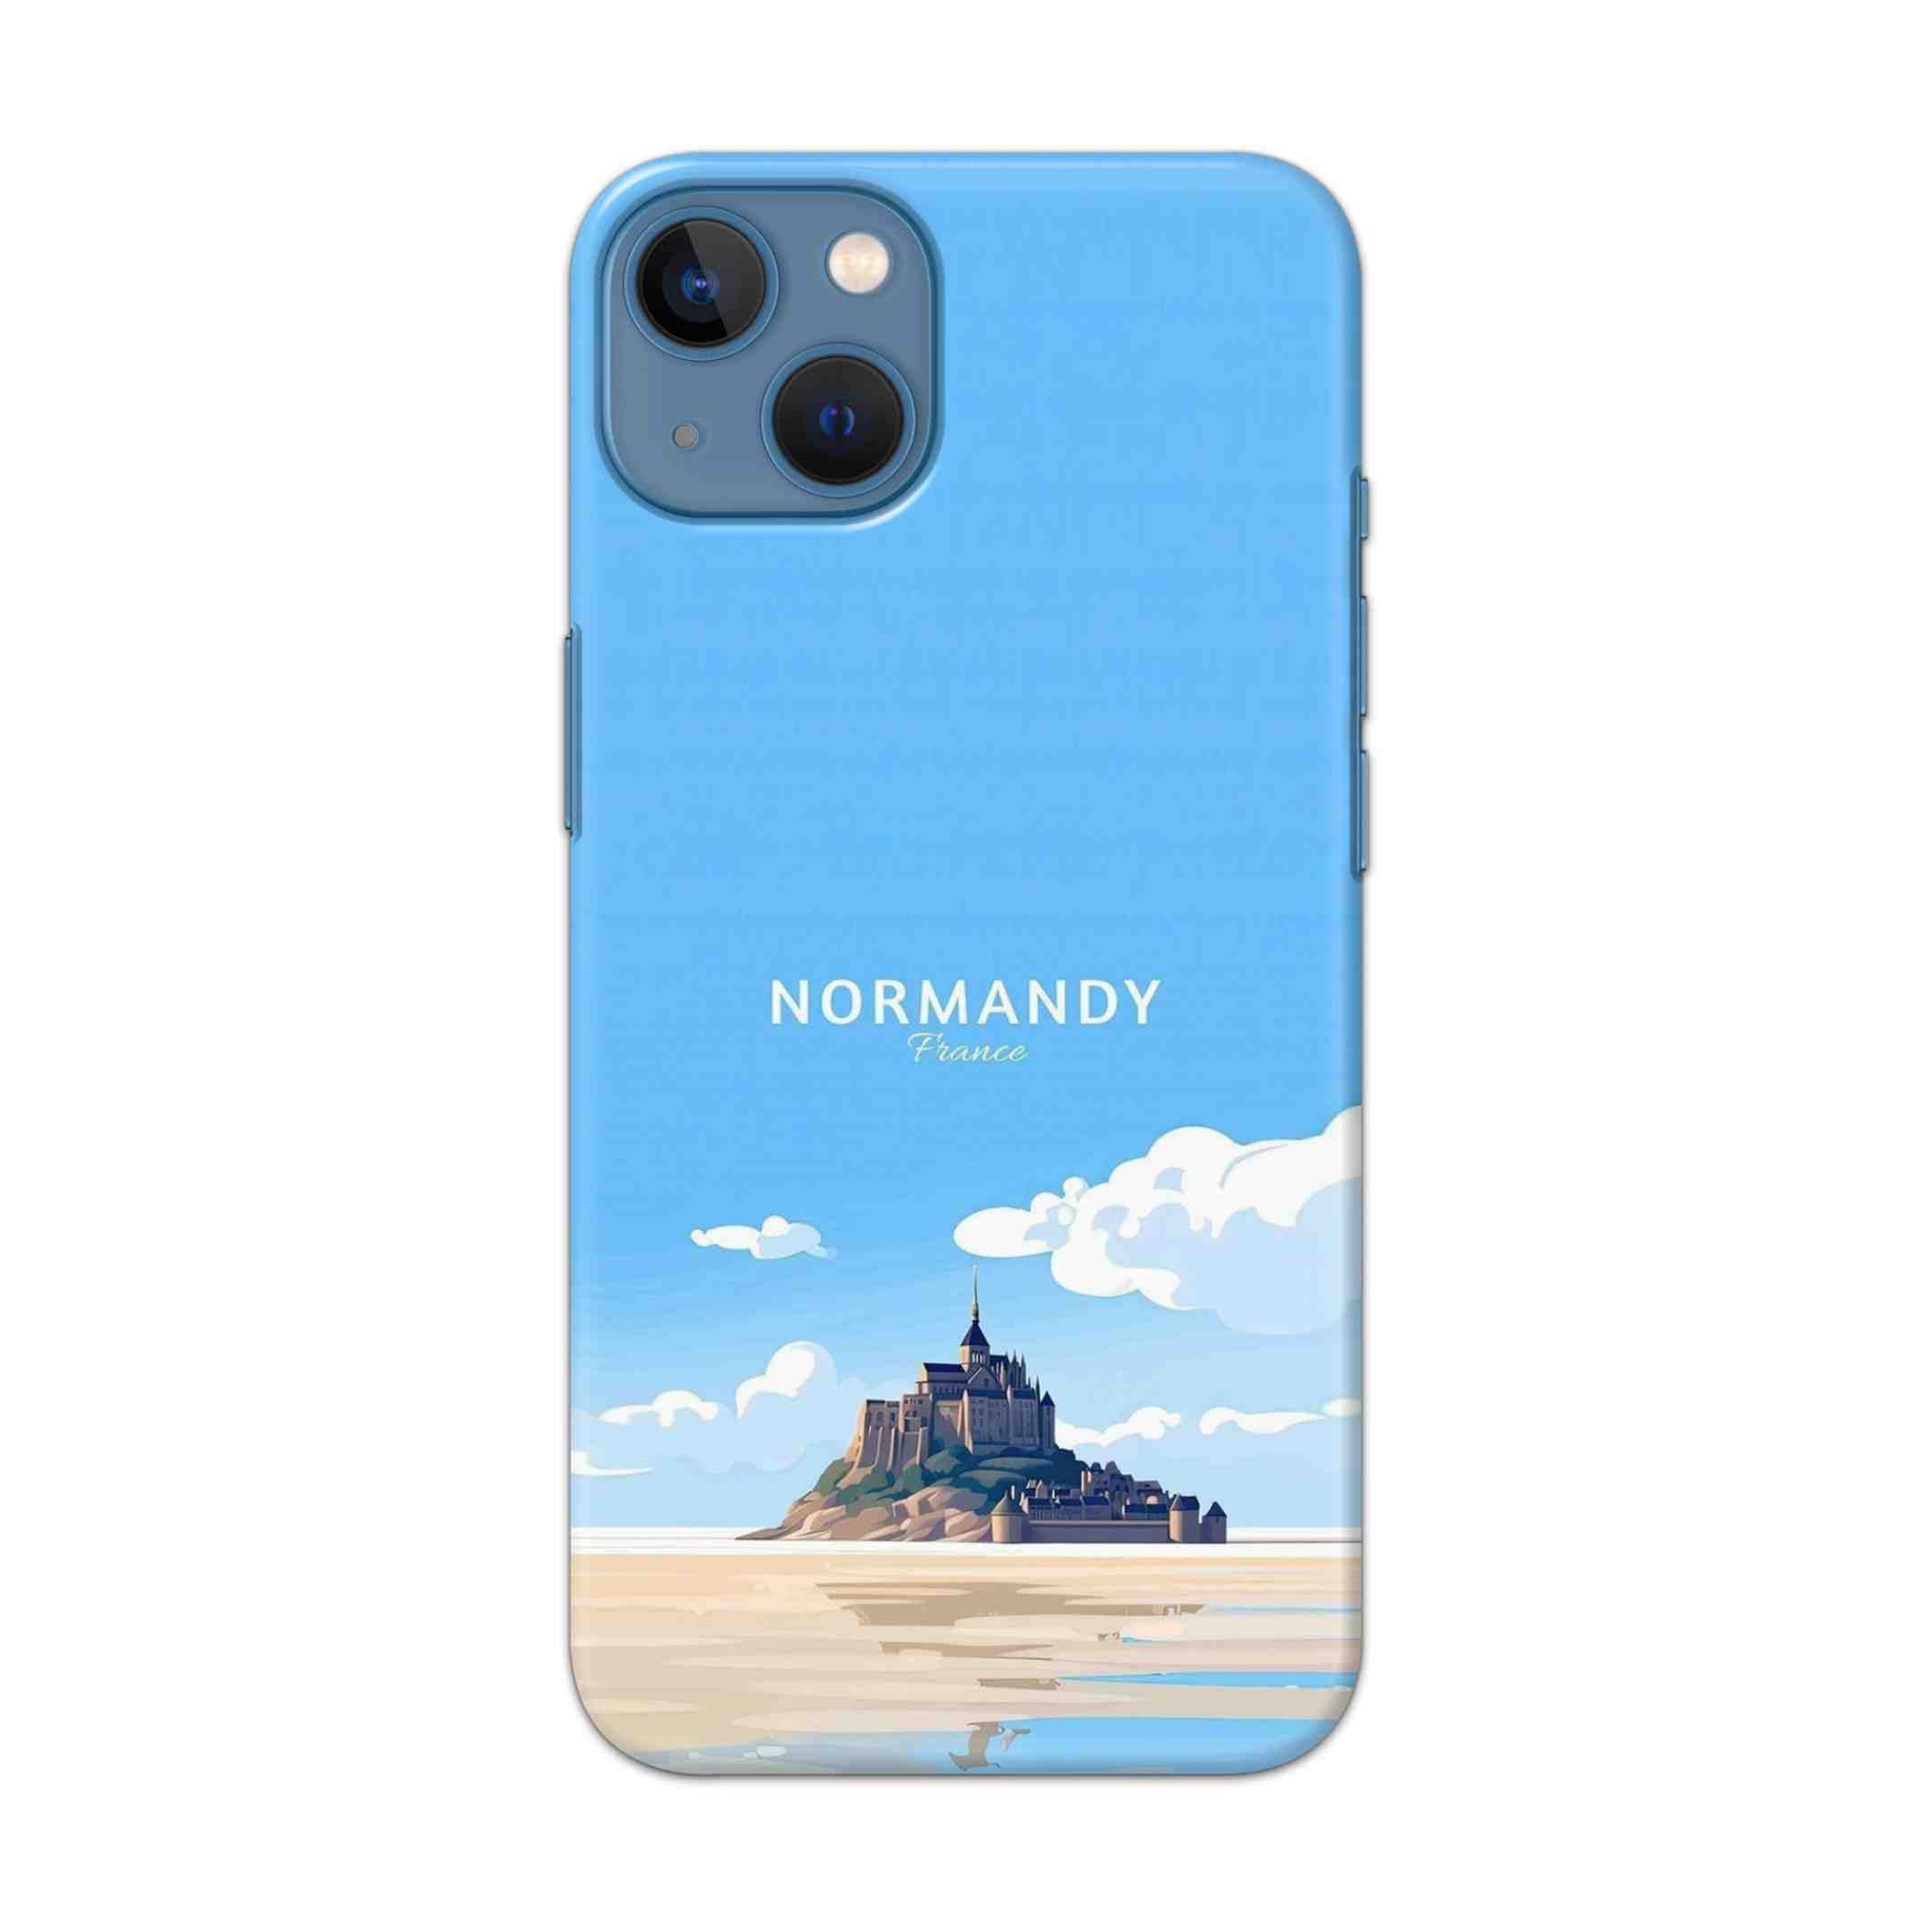 Buy Normandy Hard Back Mobile Phone Case/Cover For Apple iPhone 13 Online